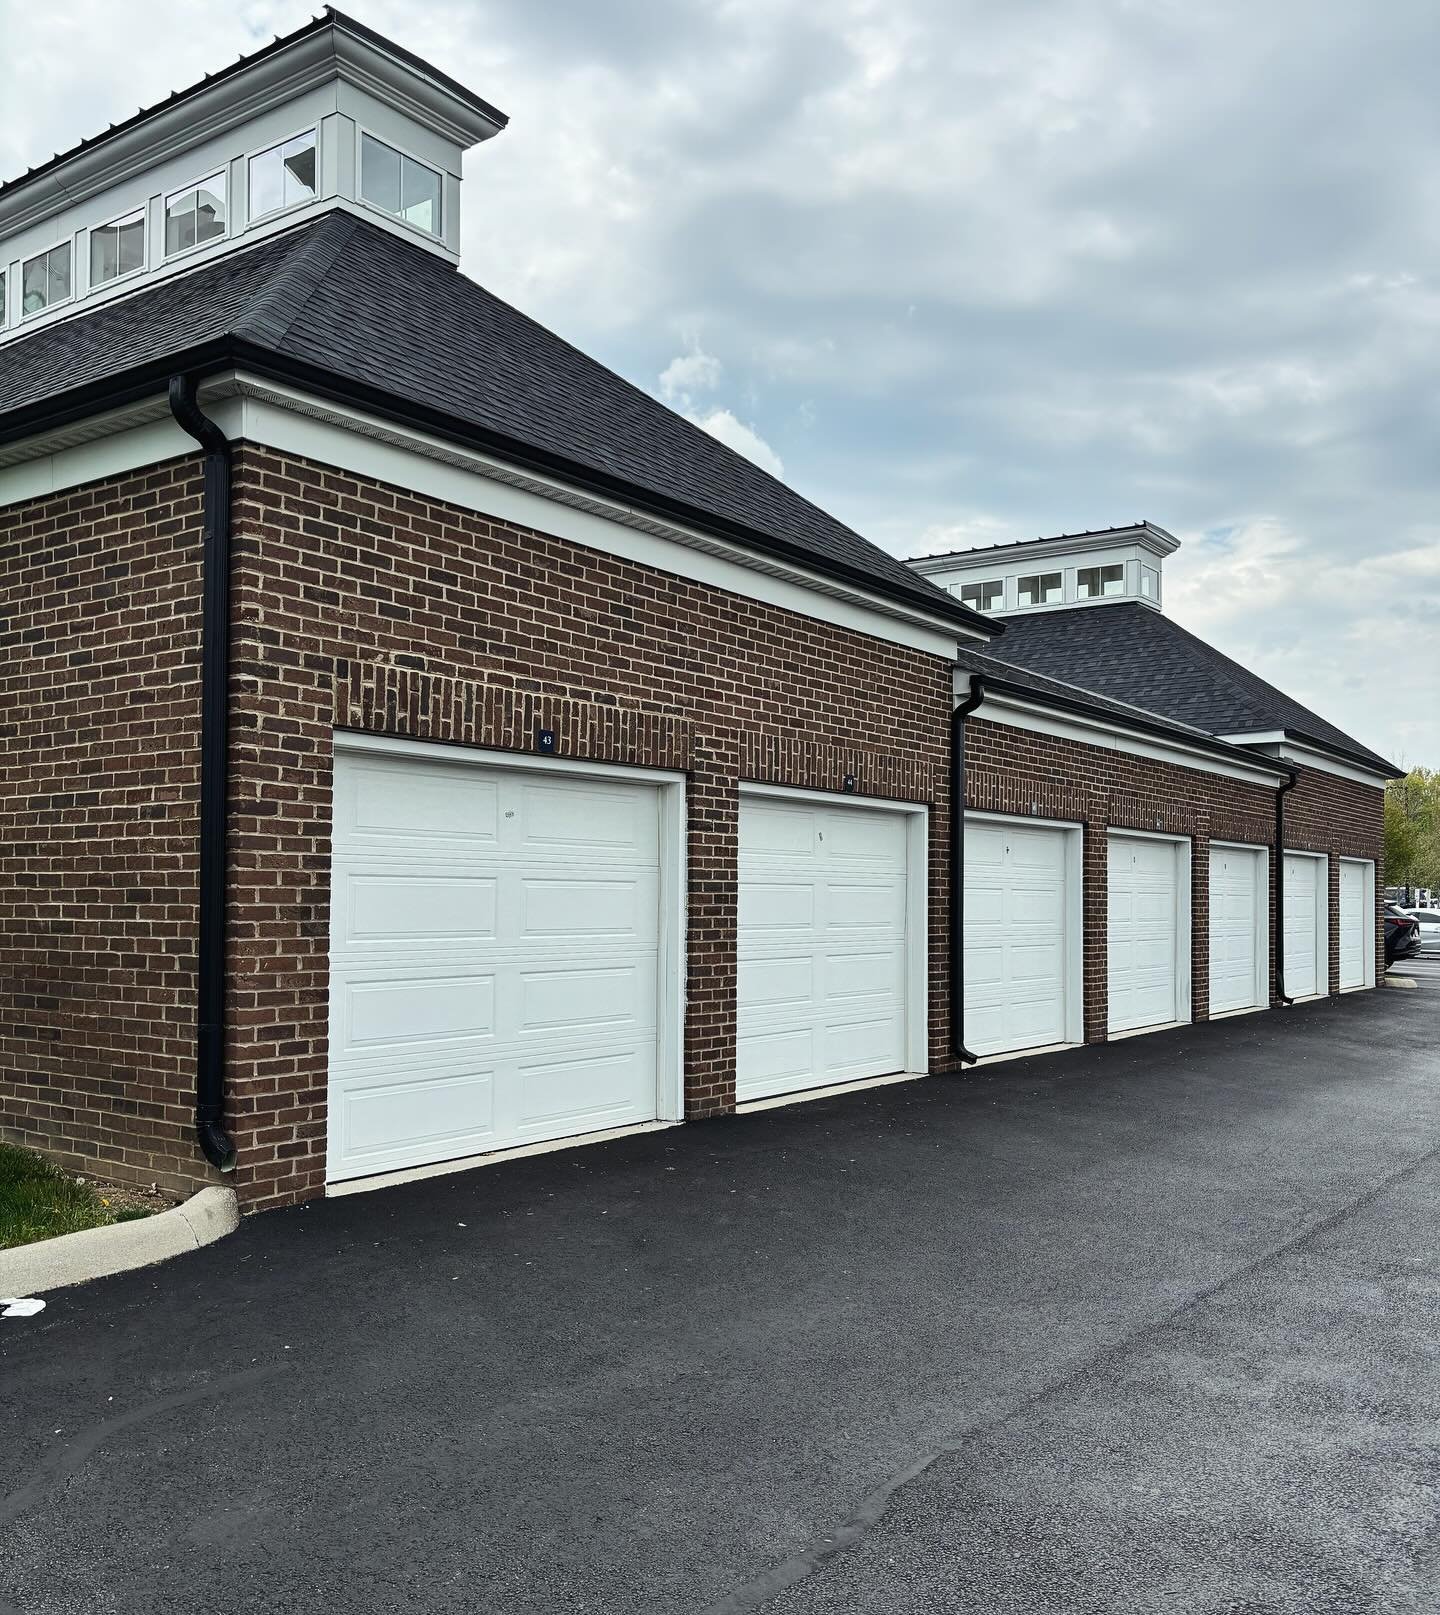 Interested in one of our garages? We got you covered (literally)! Run on down to the office and secure your spot now. Limited availability 🚗 

#garage #614living #covered #apartmenttherapy #luxury #youshouldbehere #columbus #weekend #satisfying